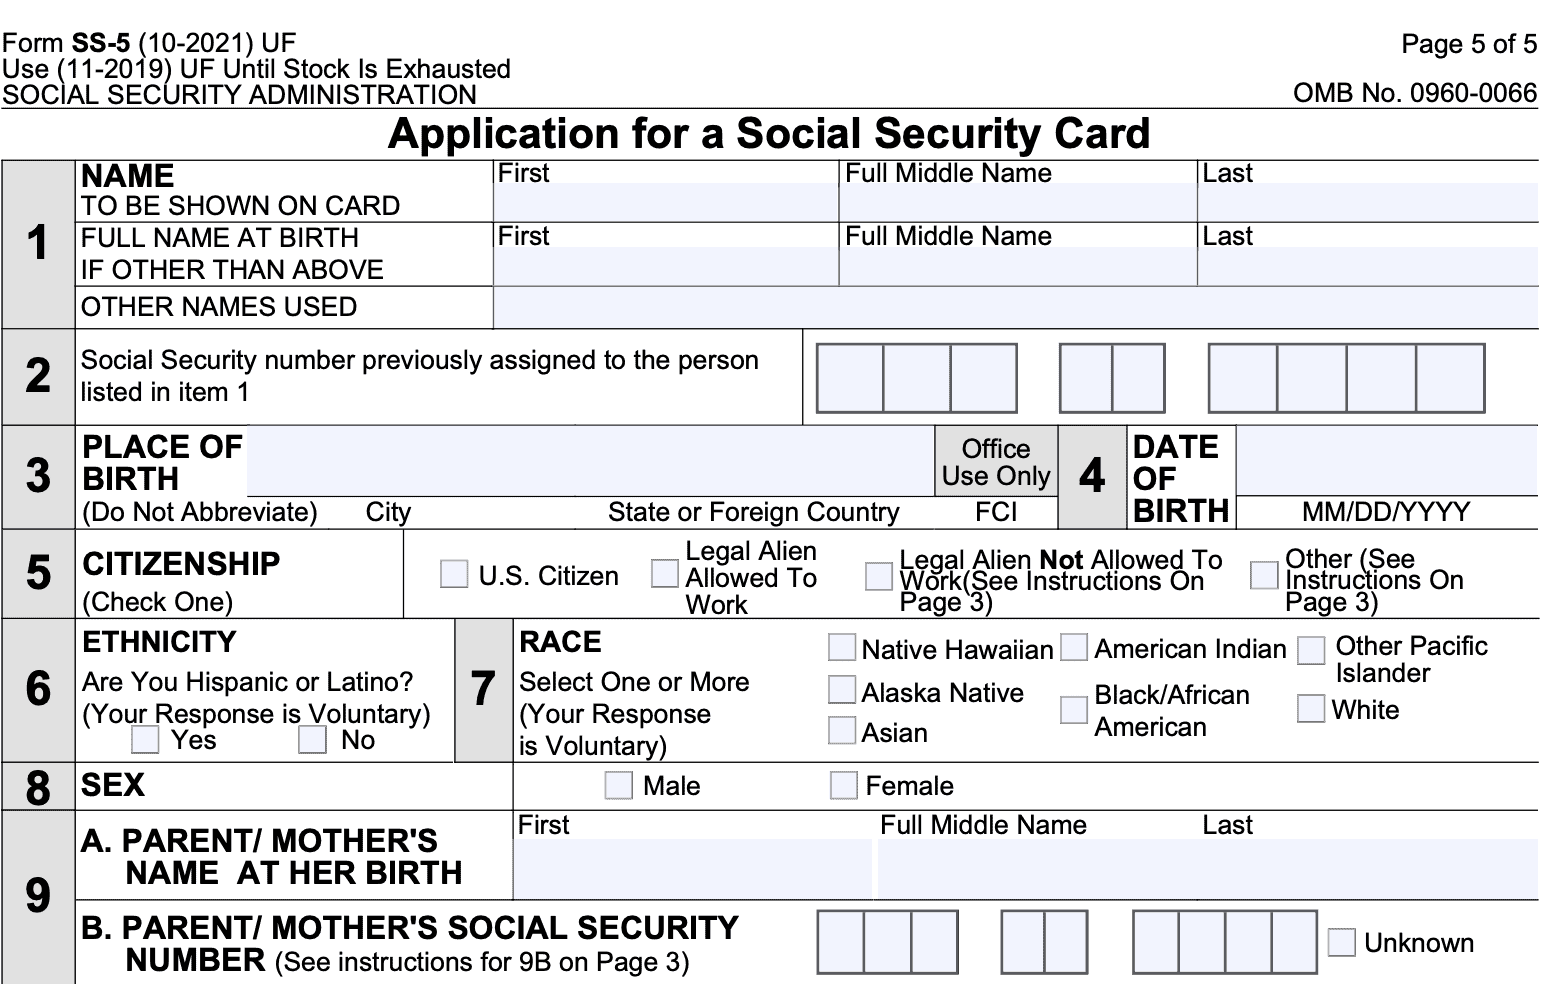 Form SS-5, Application for Social Security Card, questions 1-9